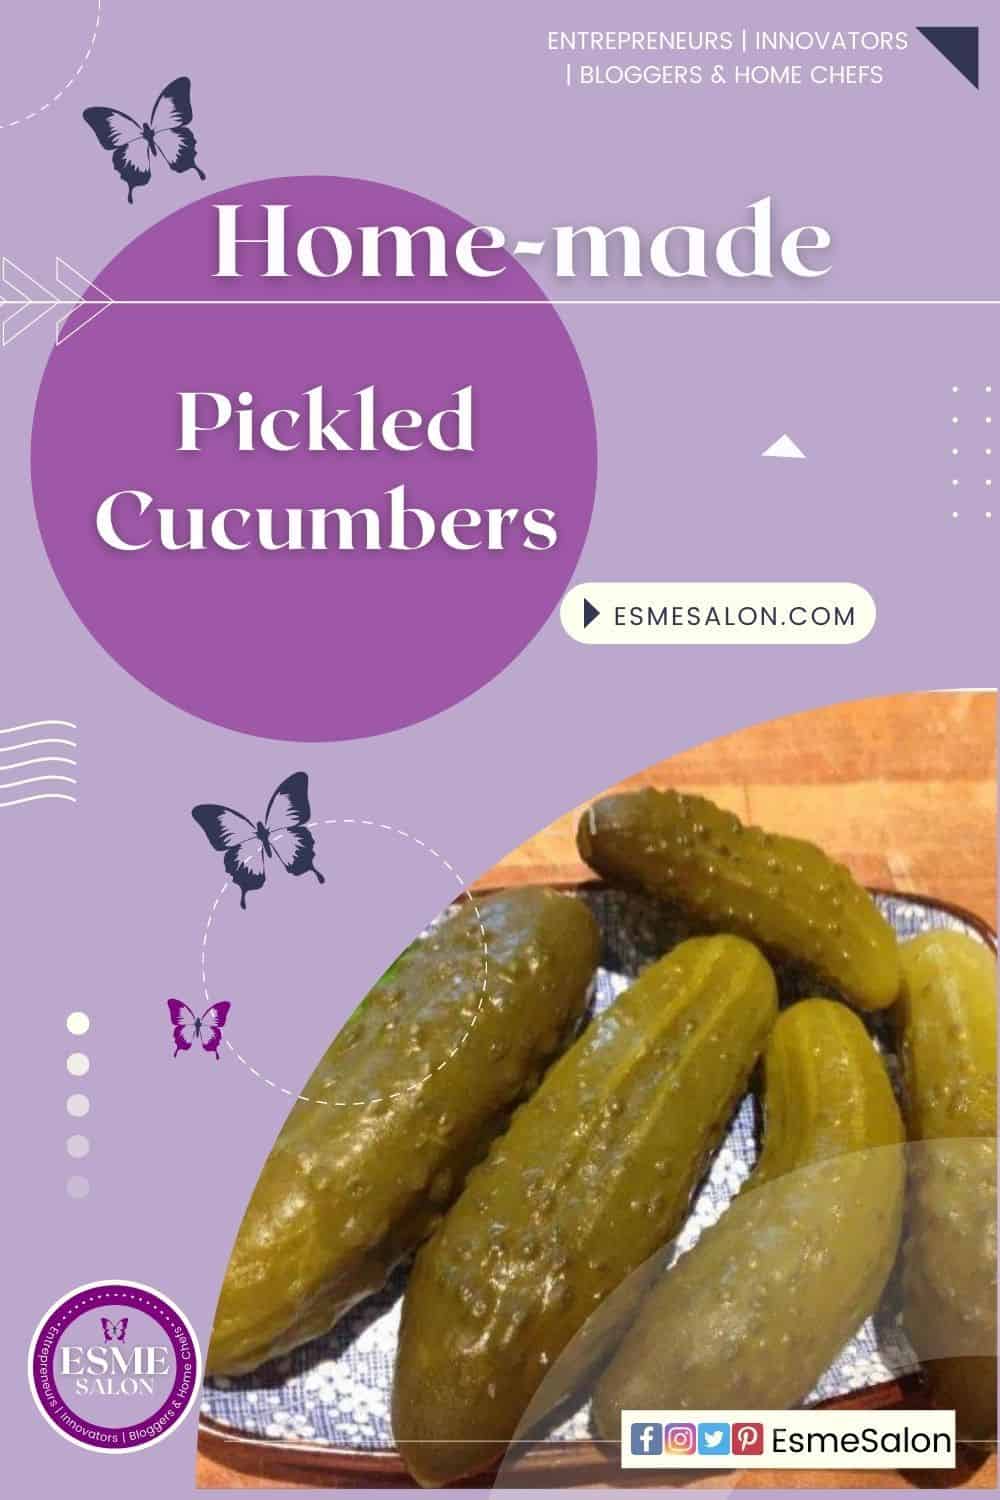 A wooden board with 8 homemade pickled cucumbers